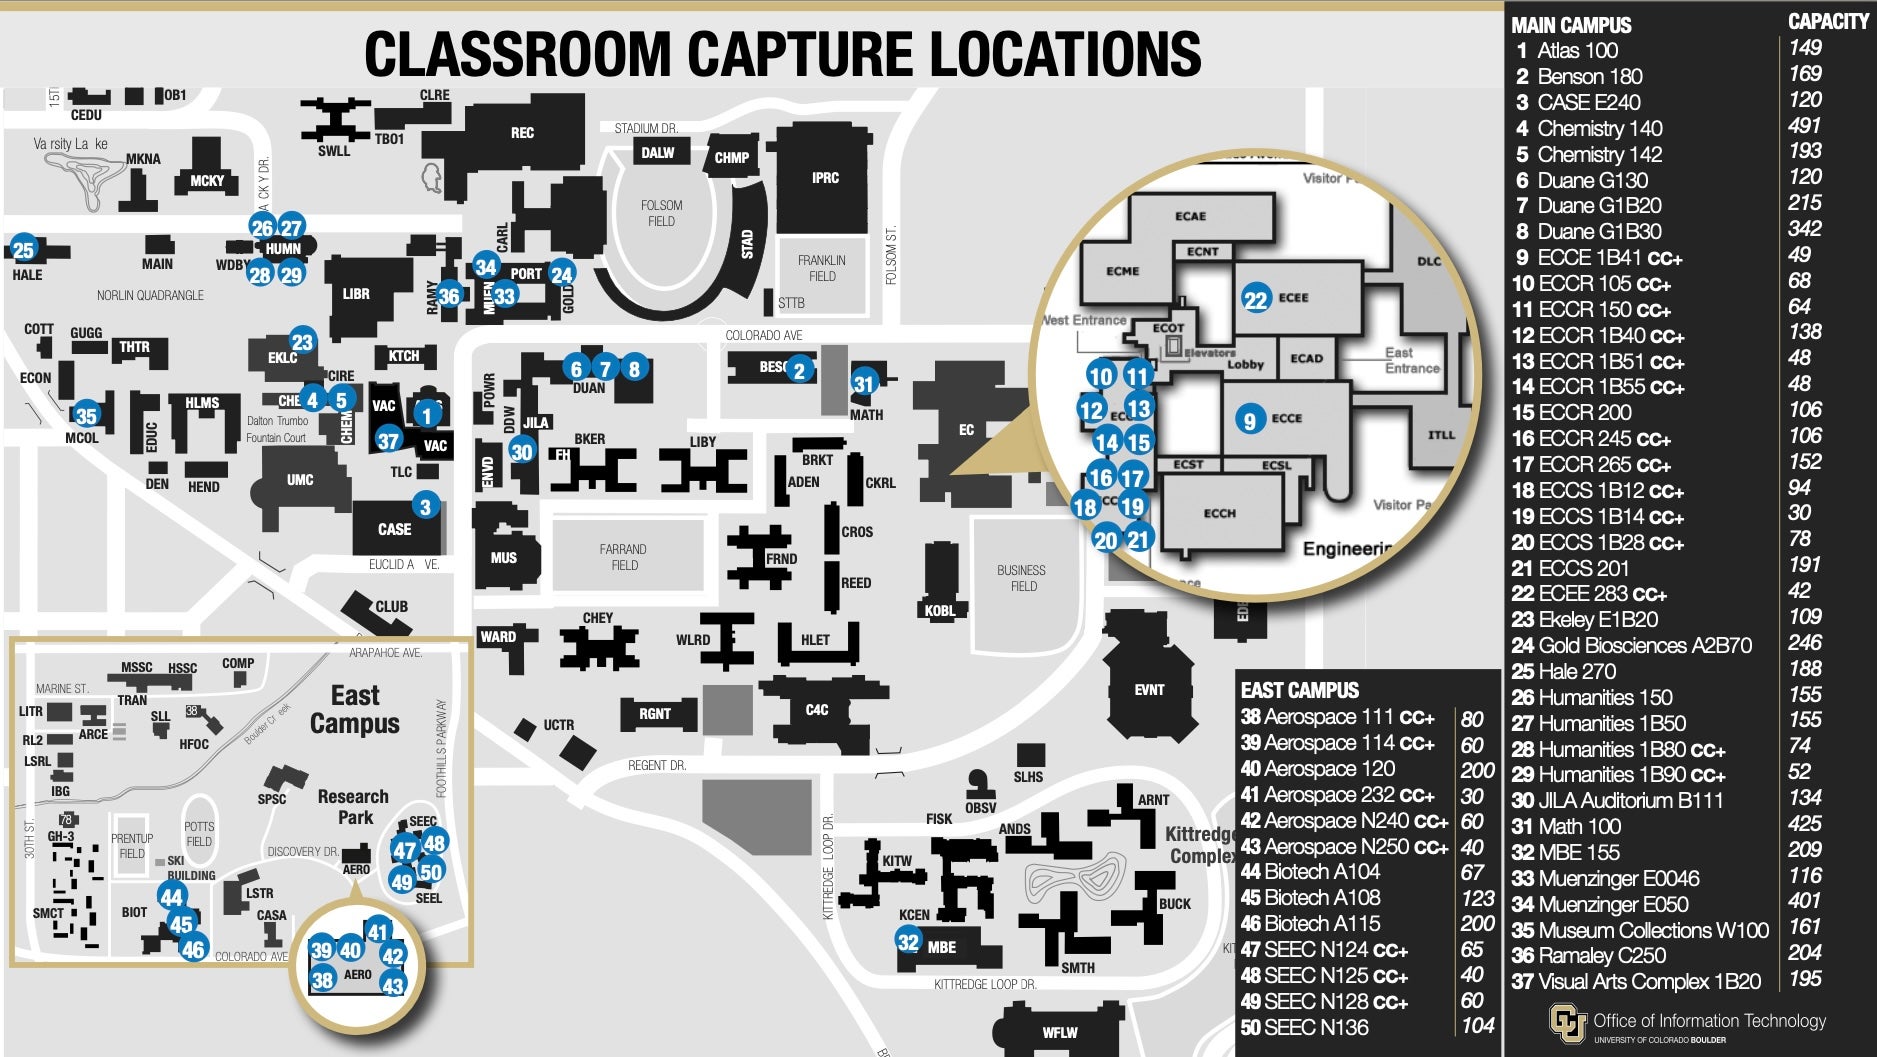 Map of Classroom Capture locations on campus